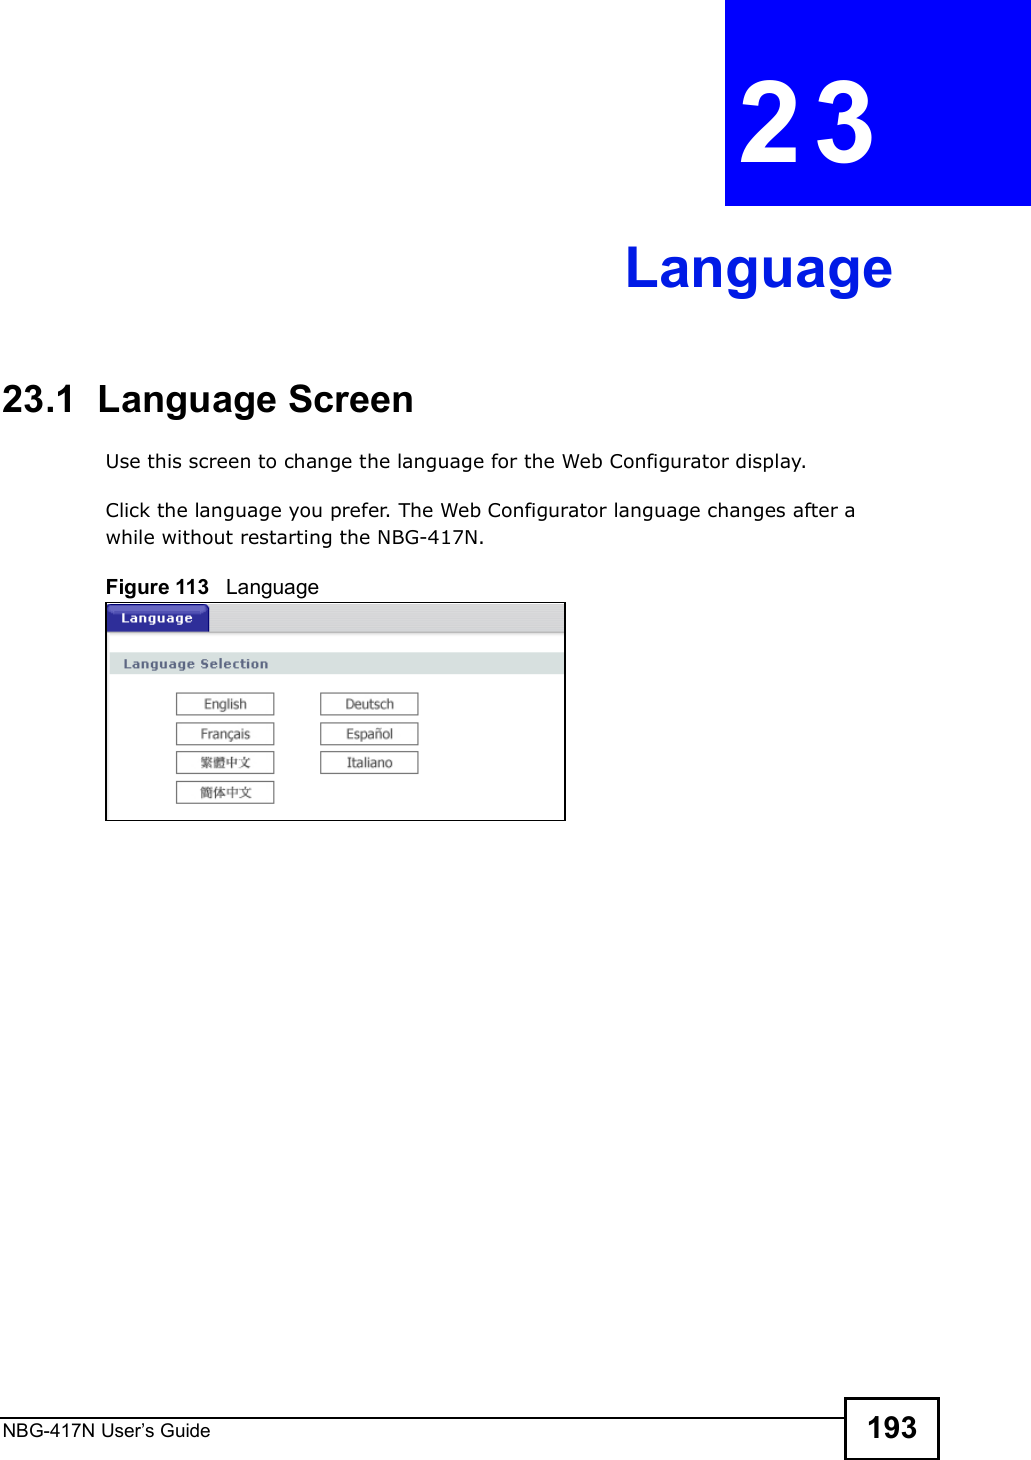 NBG-417N User s Guide 193CHAPTER  23 Language23.1  Language ScreenUse this screen to change the language for the Web Configurator display.Click the language you prefer. The Web Configurator language changes after a while without restarting the NBG-417N.Figure 113   Language